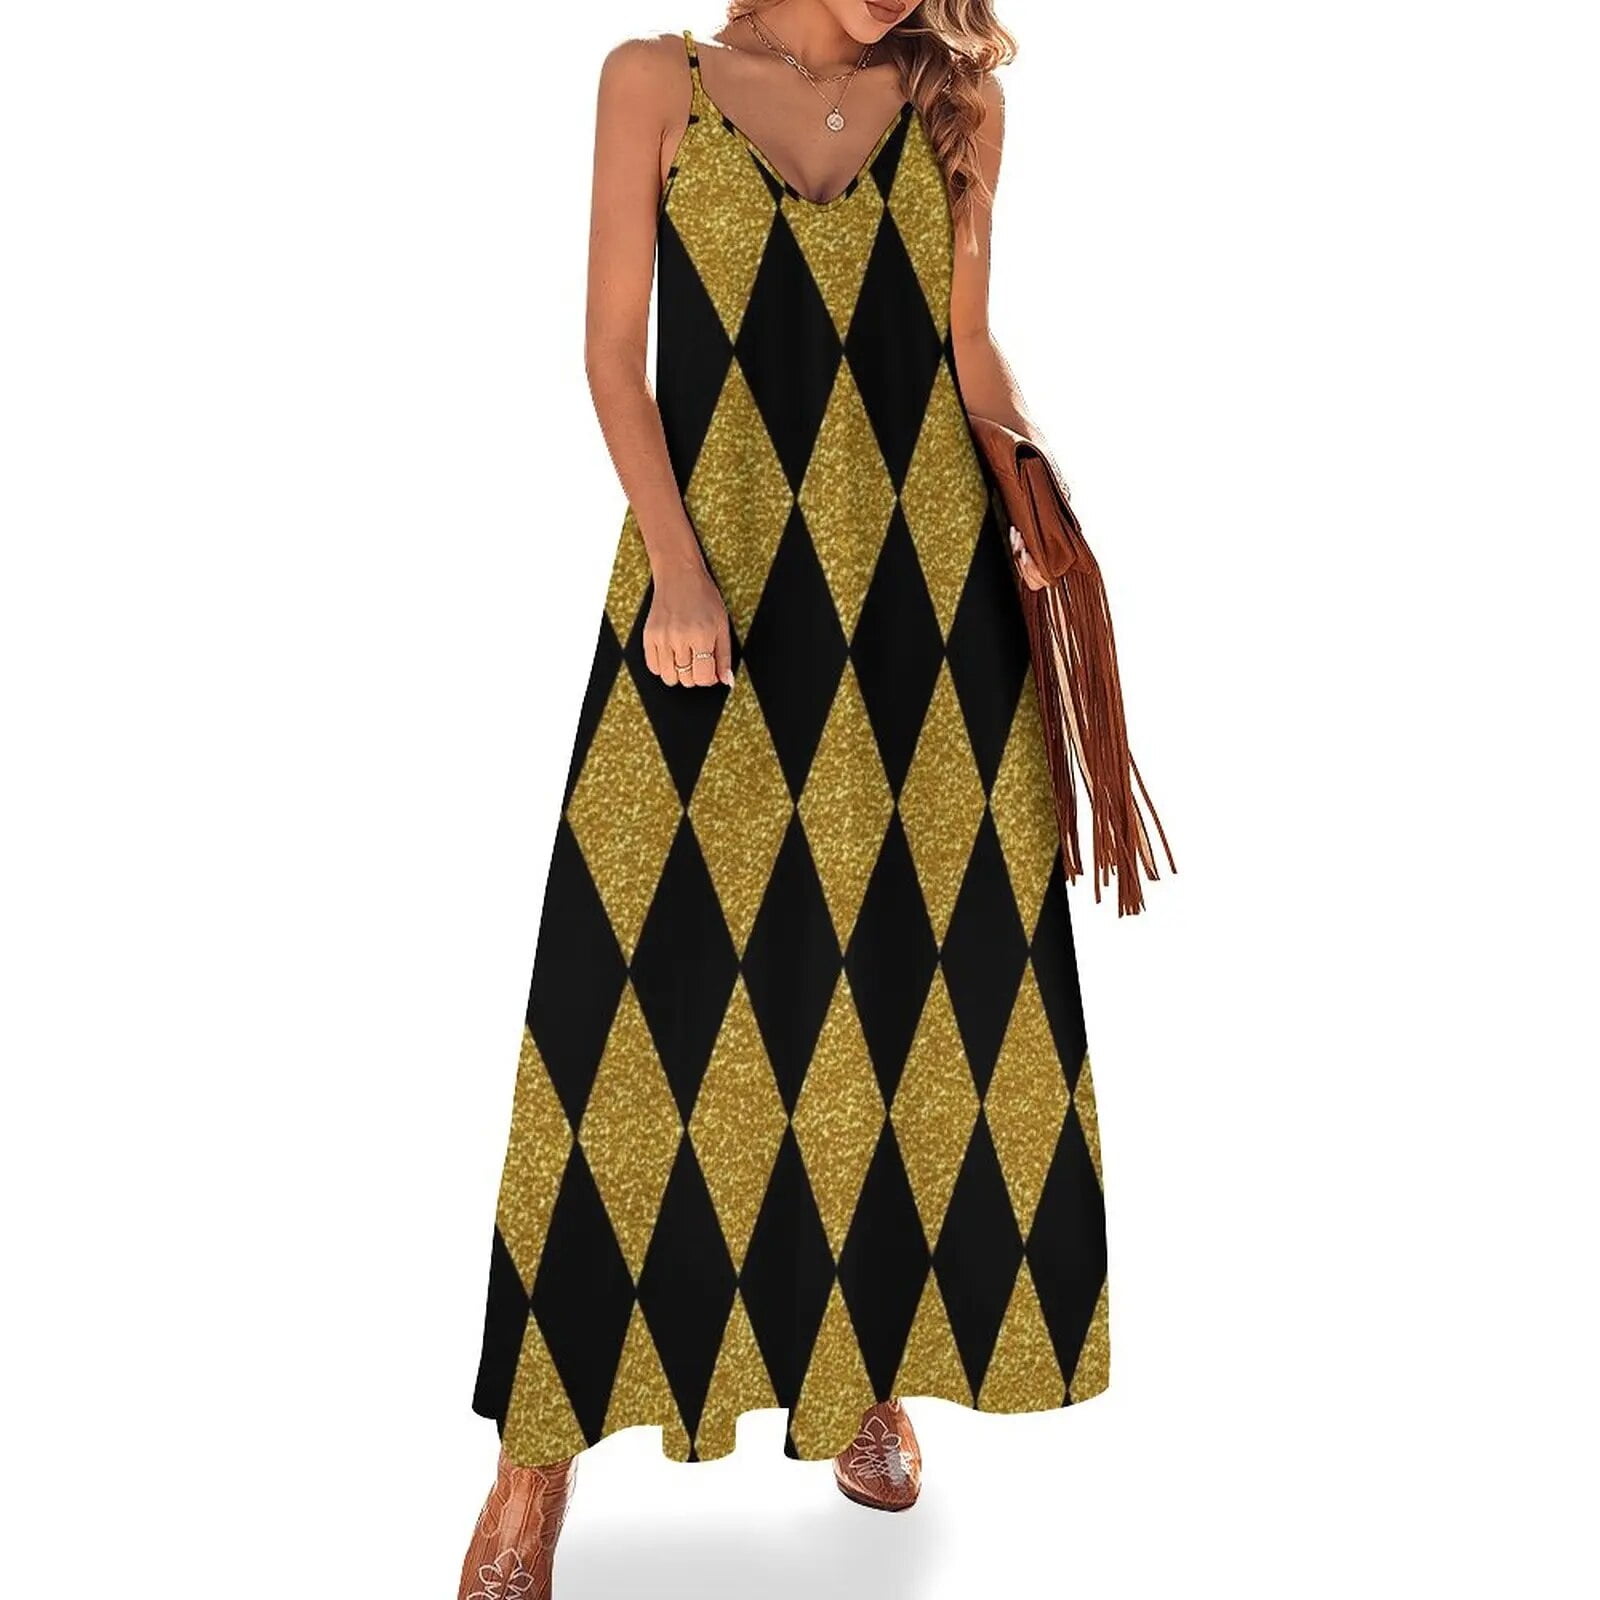 Black and Gold Harlequin Sleeveless Dress clothes for woman elegant ...